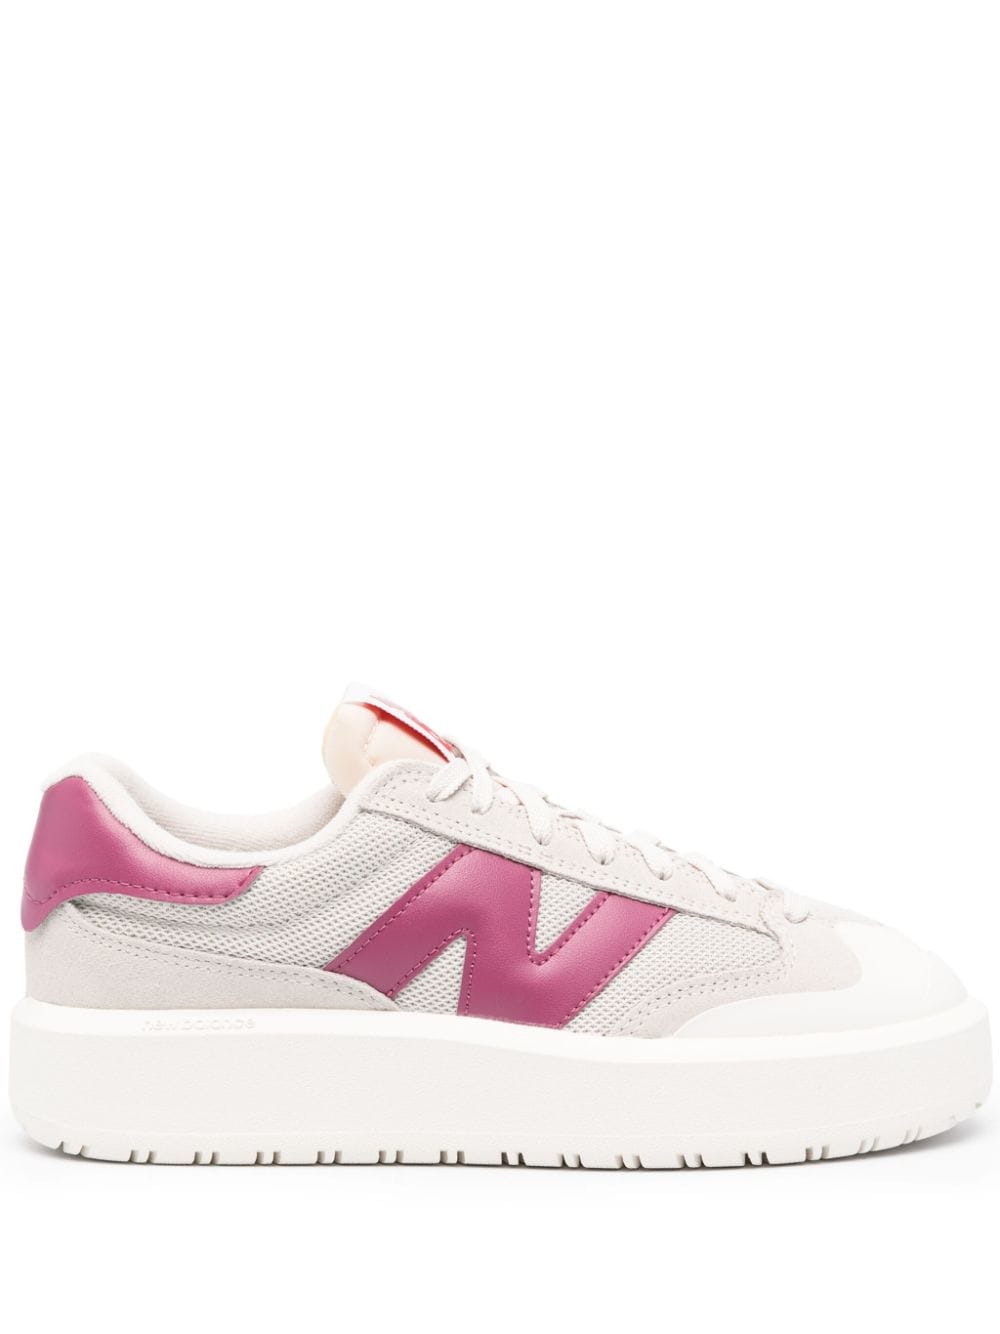 New Balance Ct302 Panelled Sneakers In Nude